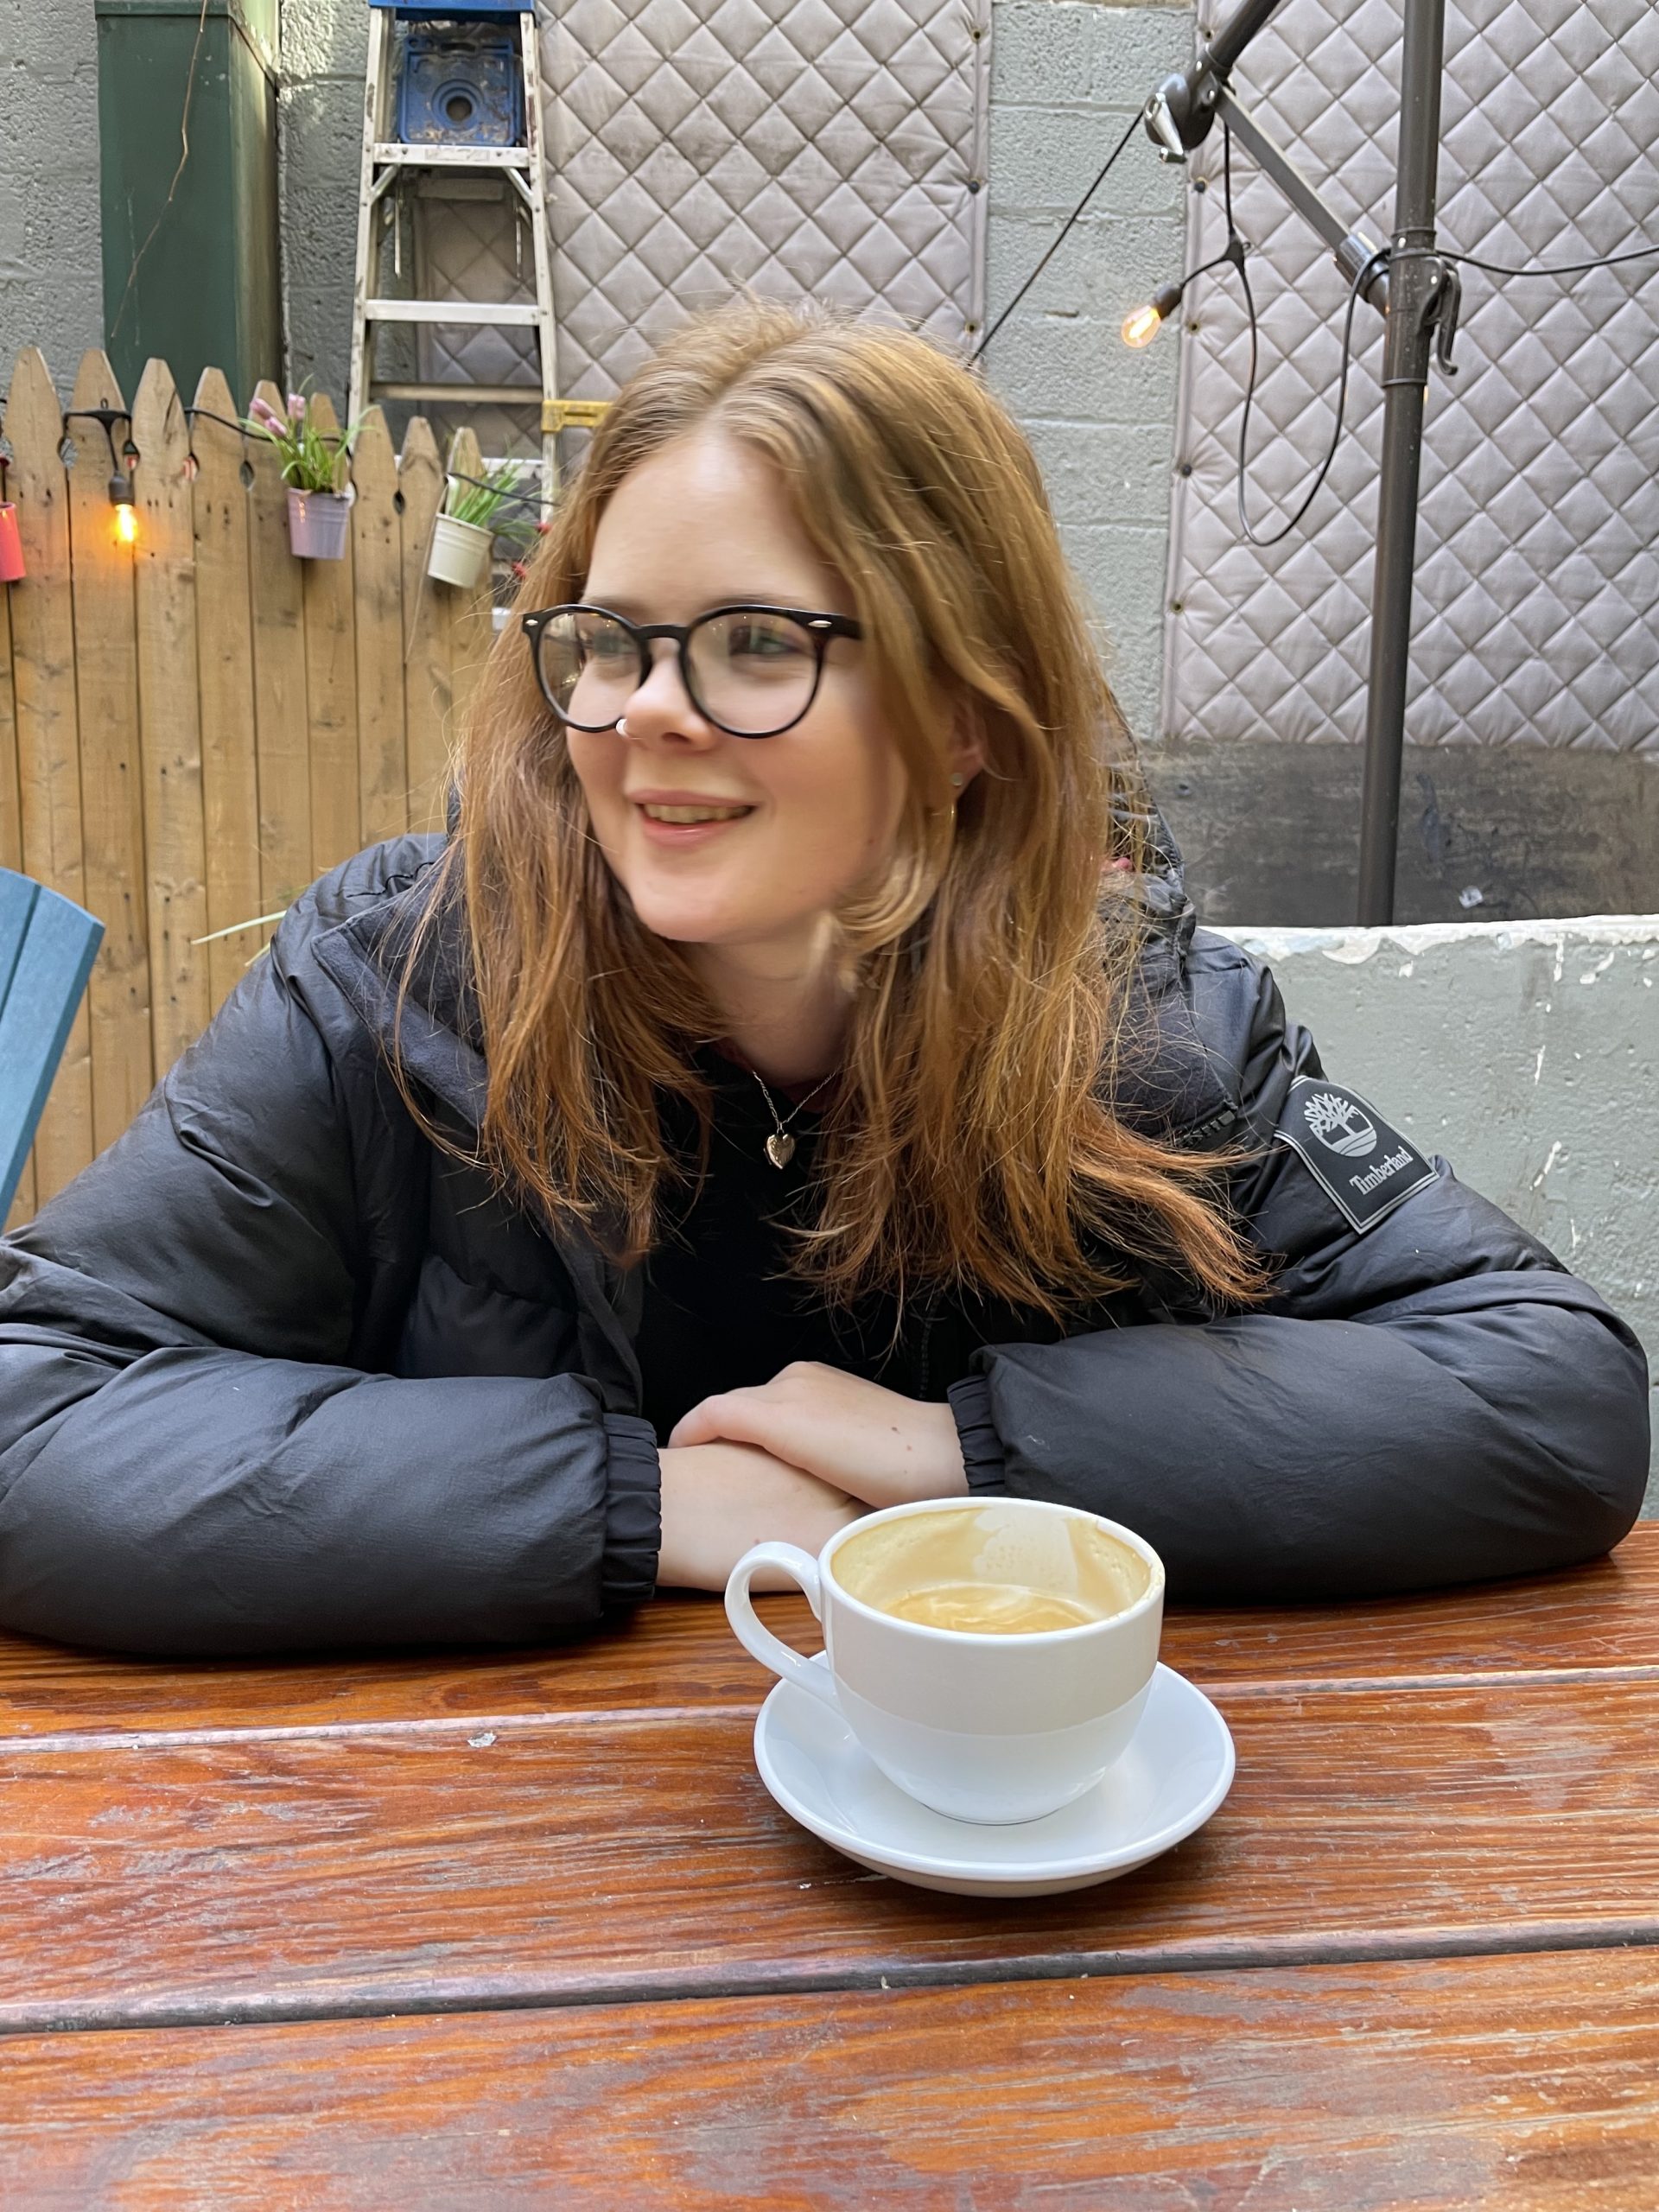 Albertine Clarke, a woman with red hair, sits at a wooden table with a cappuccino. She is wearing a black puffer jacket and glasses.